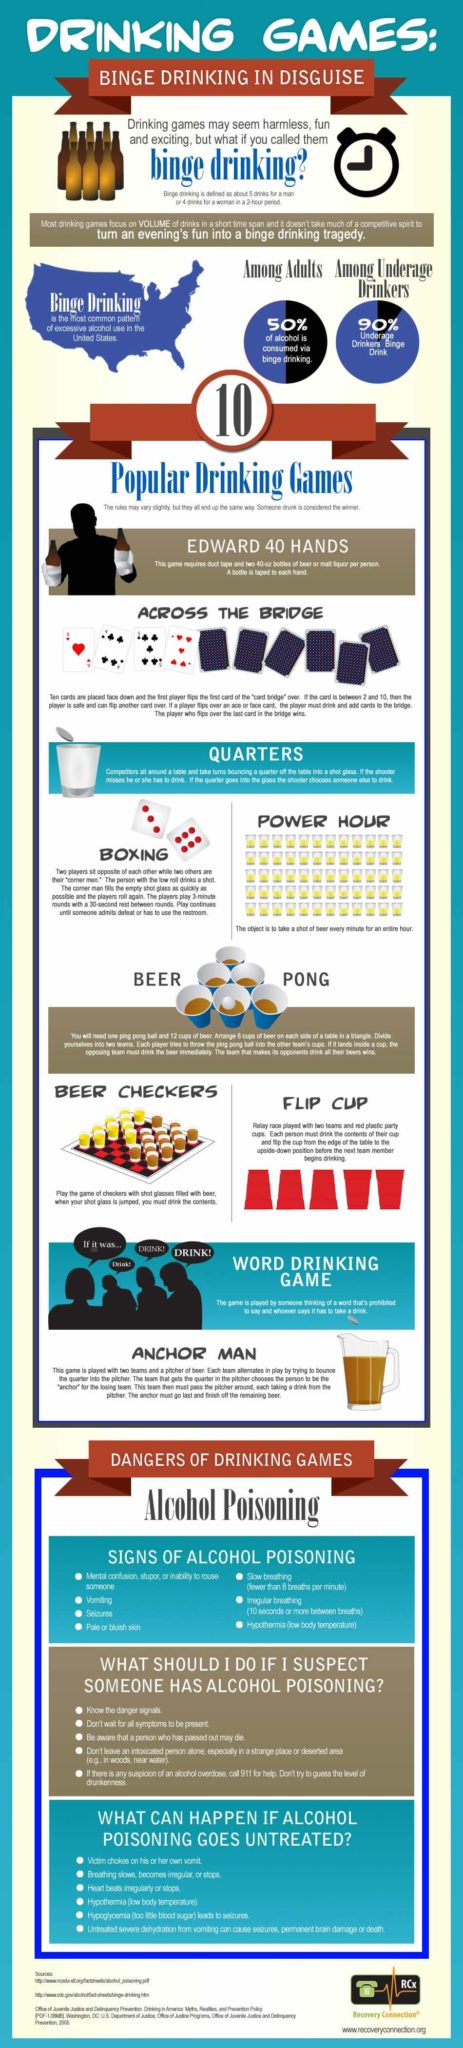 drinking-games-infographic